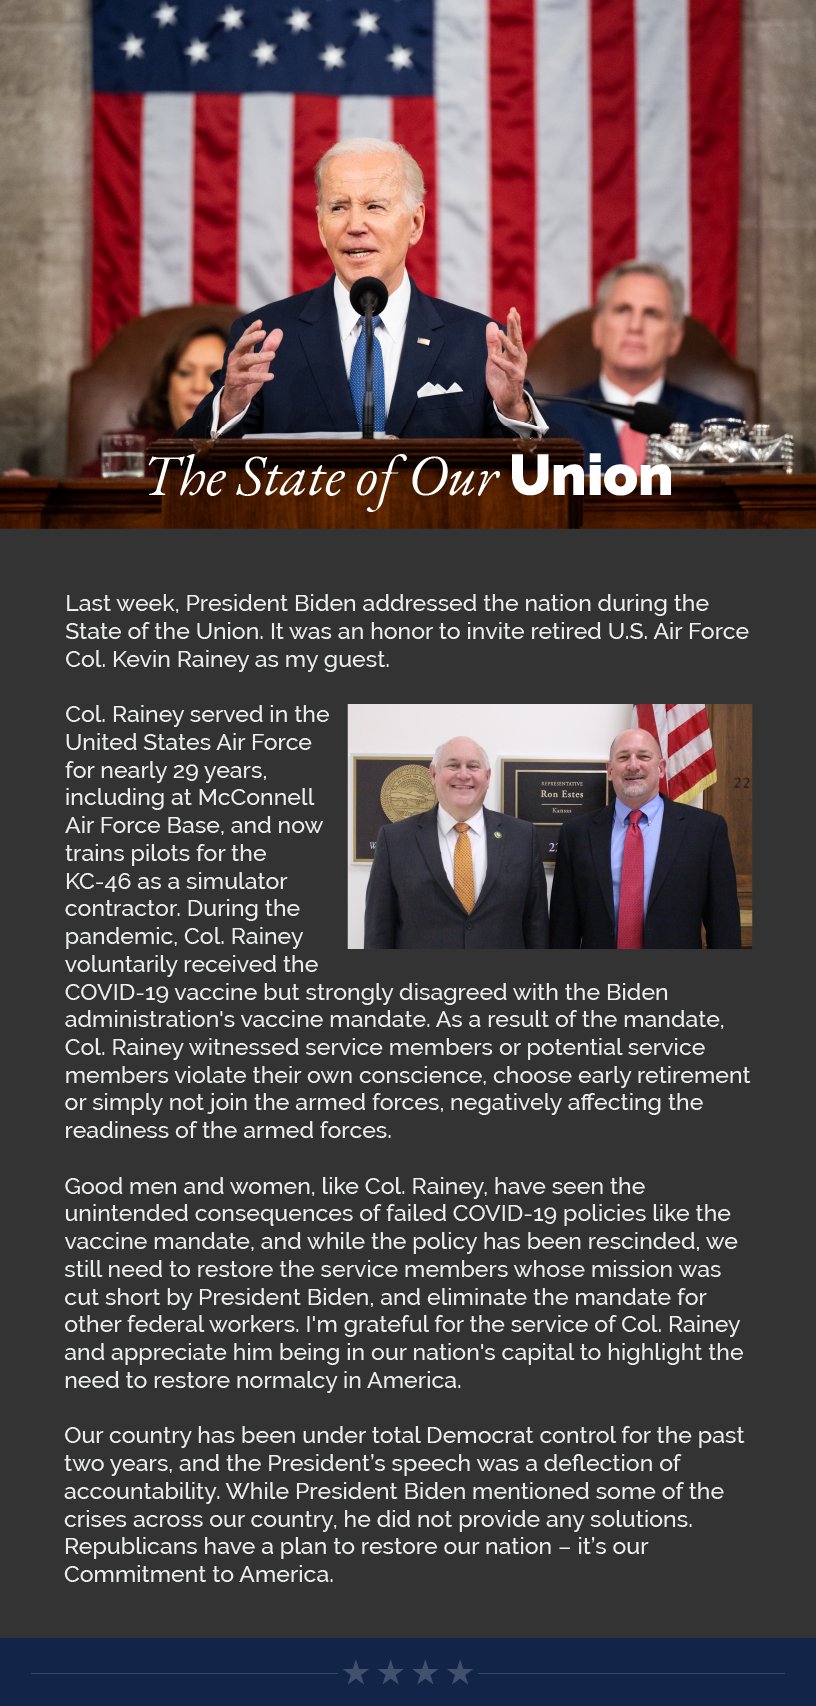 Headline: The State of Our Union.  Last week, President Biden addressed the nation during the State of the Union. It was an honor to invite retired U.S. Air Force Col. Kevin Rainey as my guest.  Col. Rainey served in the United States Air Force for nearly 29 years, including at McConnell Air Force Base, and now trains pilots for the KC-46 as a simulator contractor. During the pandemic, Col. Rainey voluntarily received the COVID-19 vaccine but strongly disagreed with the Biden administration's vaccine mandate. As a result of the mandate, Col. Rainey witnessed service members or potential service members violate their own conscience, choose early retirement or simply not join the armed forces, negatively affecting the readiness of the armed forces.   Good men and women, like Col. Rainey, have seen the unintended consequences of failed COVID-19 policies like the vaccine mandate, and while the policy has been rescinded, we still need to restore the service members whose mission was cut short by President Biden, and eliminate the mandate for other federal workers. I'm grateful for the service of Col. Rainey and appreciate him being in our nation's capital to highlight the need to restore normalcy in America.  Our country has been under total Democrat control for the past two years, and the President’s speech was a deflection of accountability. While President Biden mentioned some of the crises across our country, he did not provide any solutions. Republicans have a plan to restore our nation – it’s our Commitment to America.